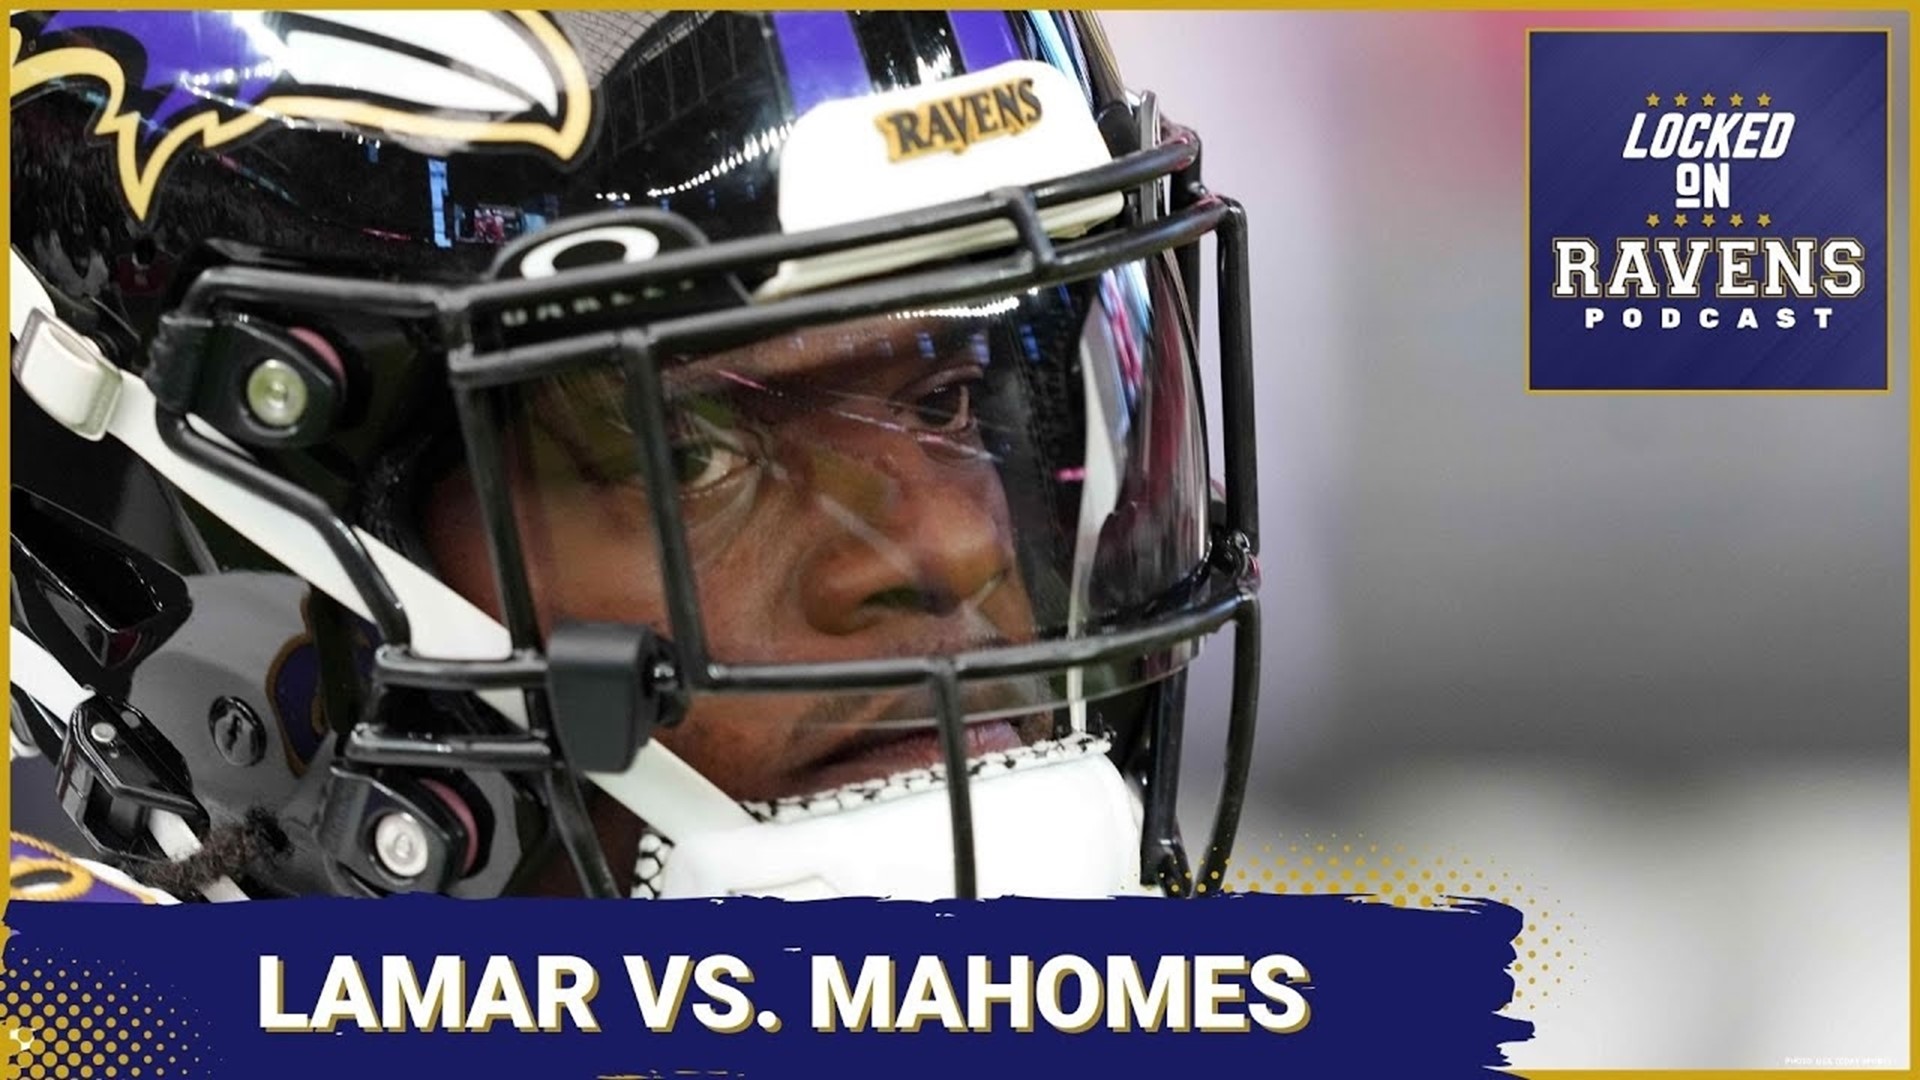 We look at why Lamar Jackson is being compared to Patrick Mahomes, discussing the slander that's happening to the Baltimore Ravens quarterback and more.